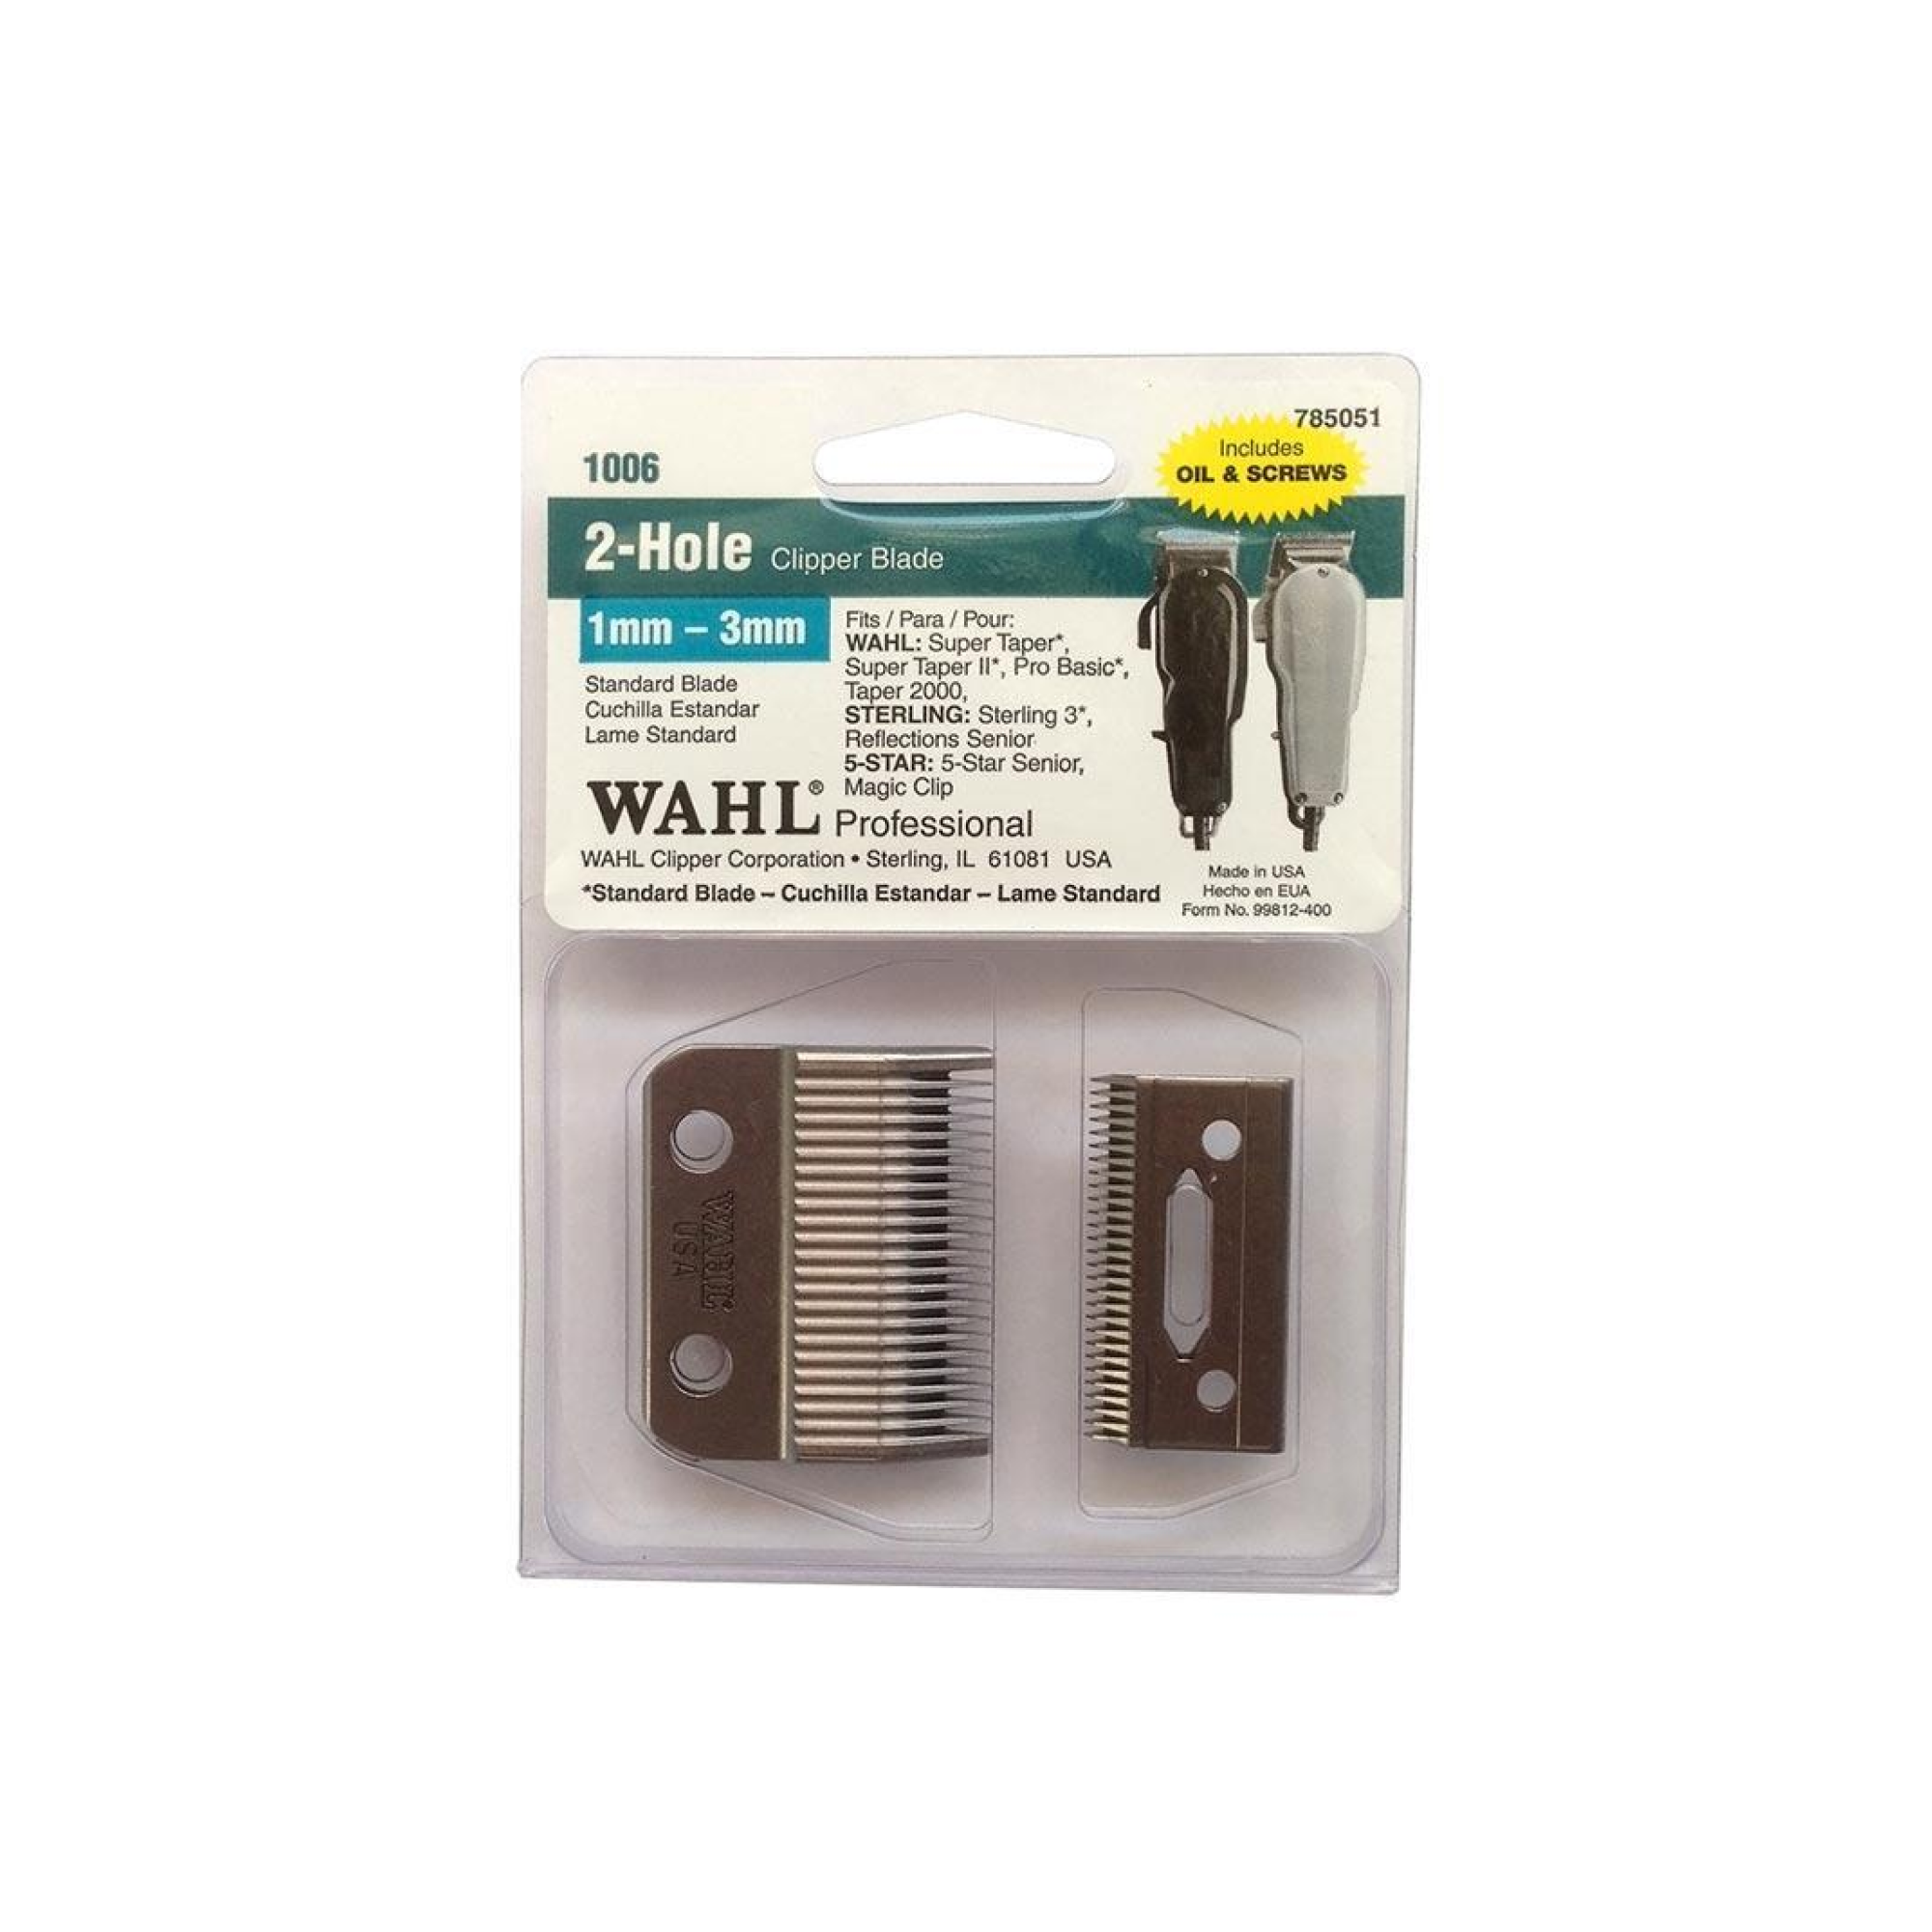 2-Hole clipper blade item # 1006